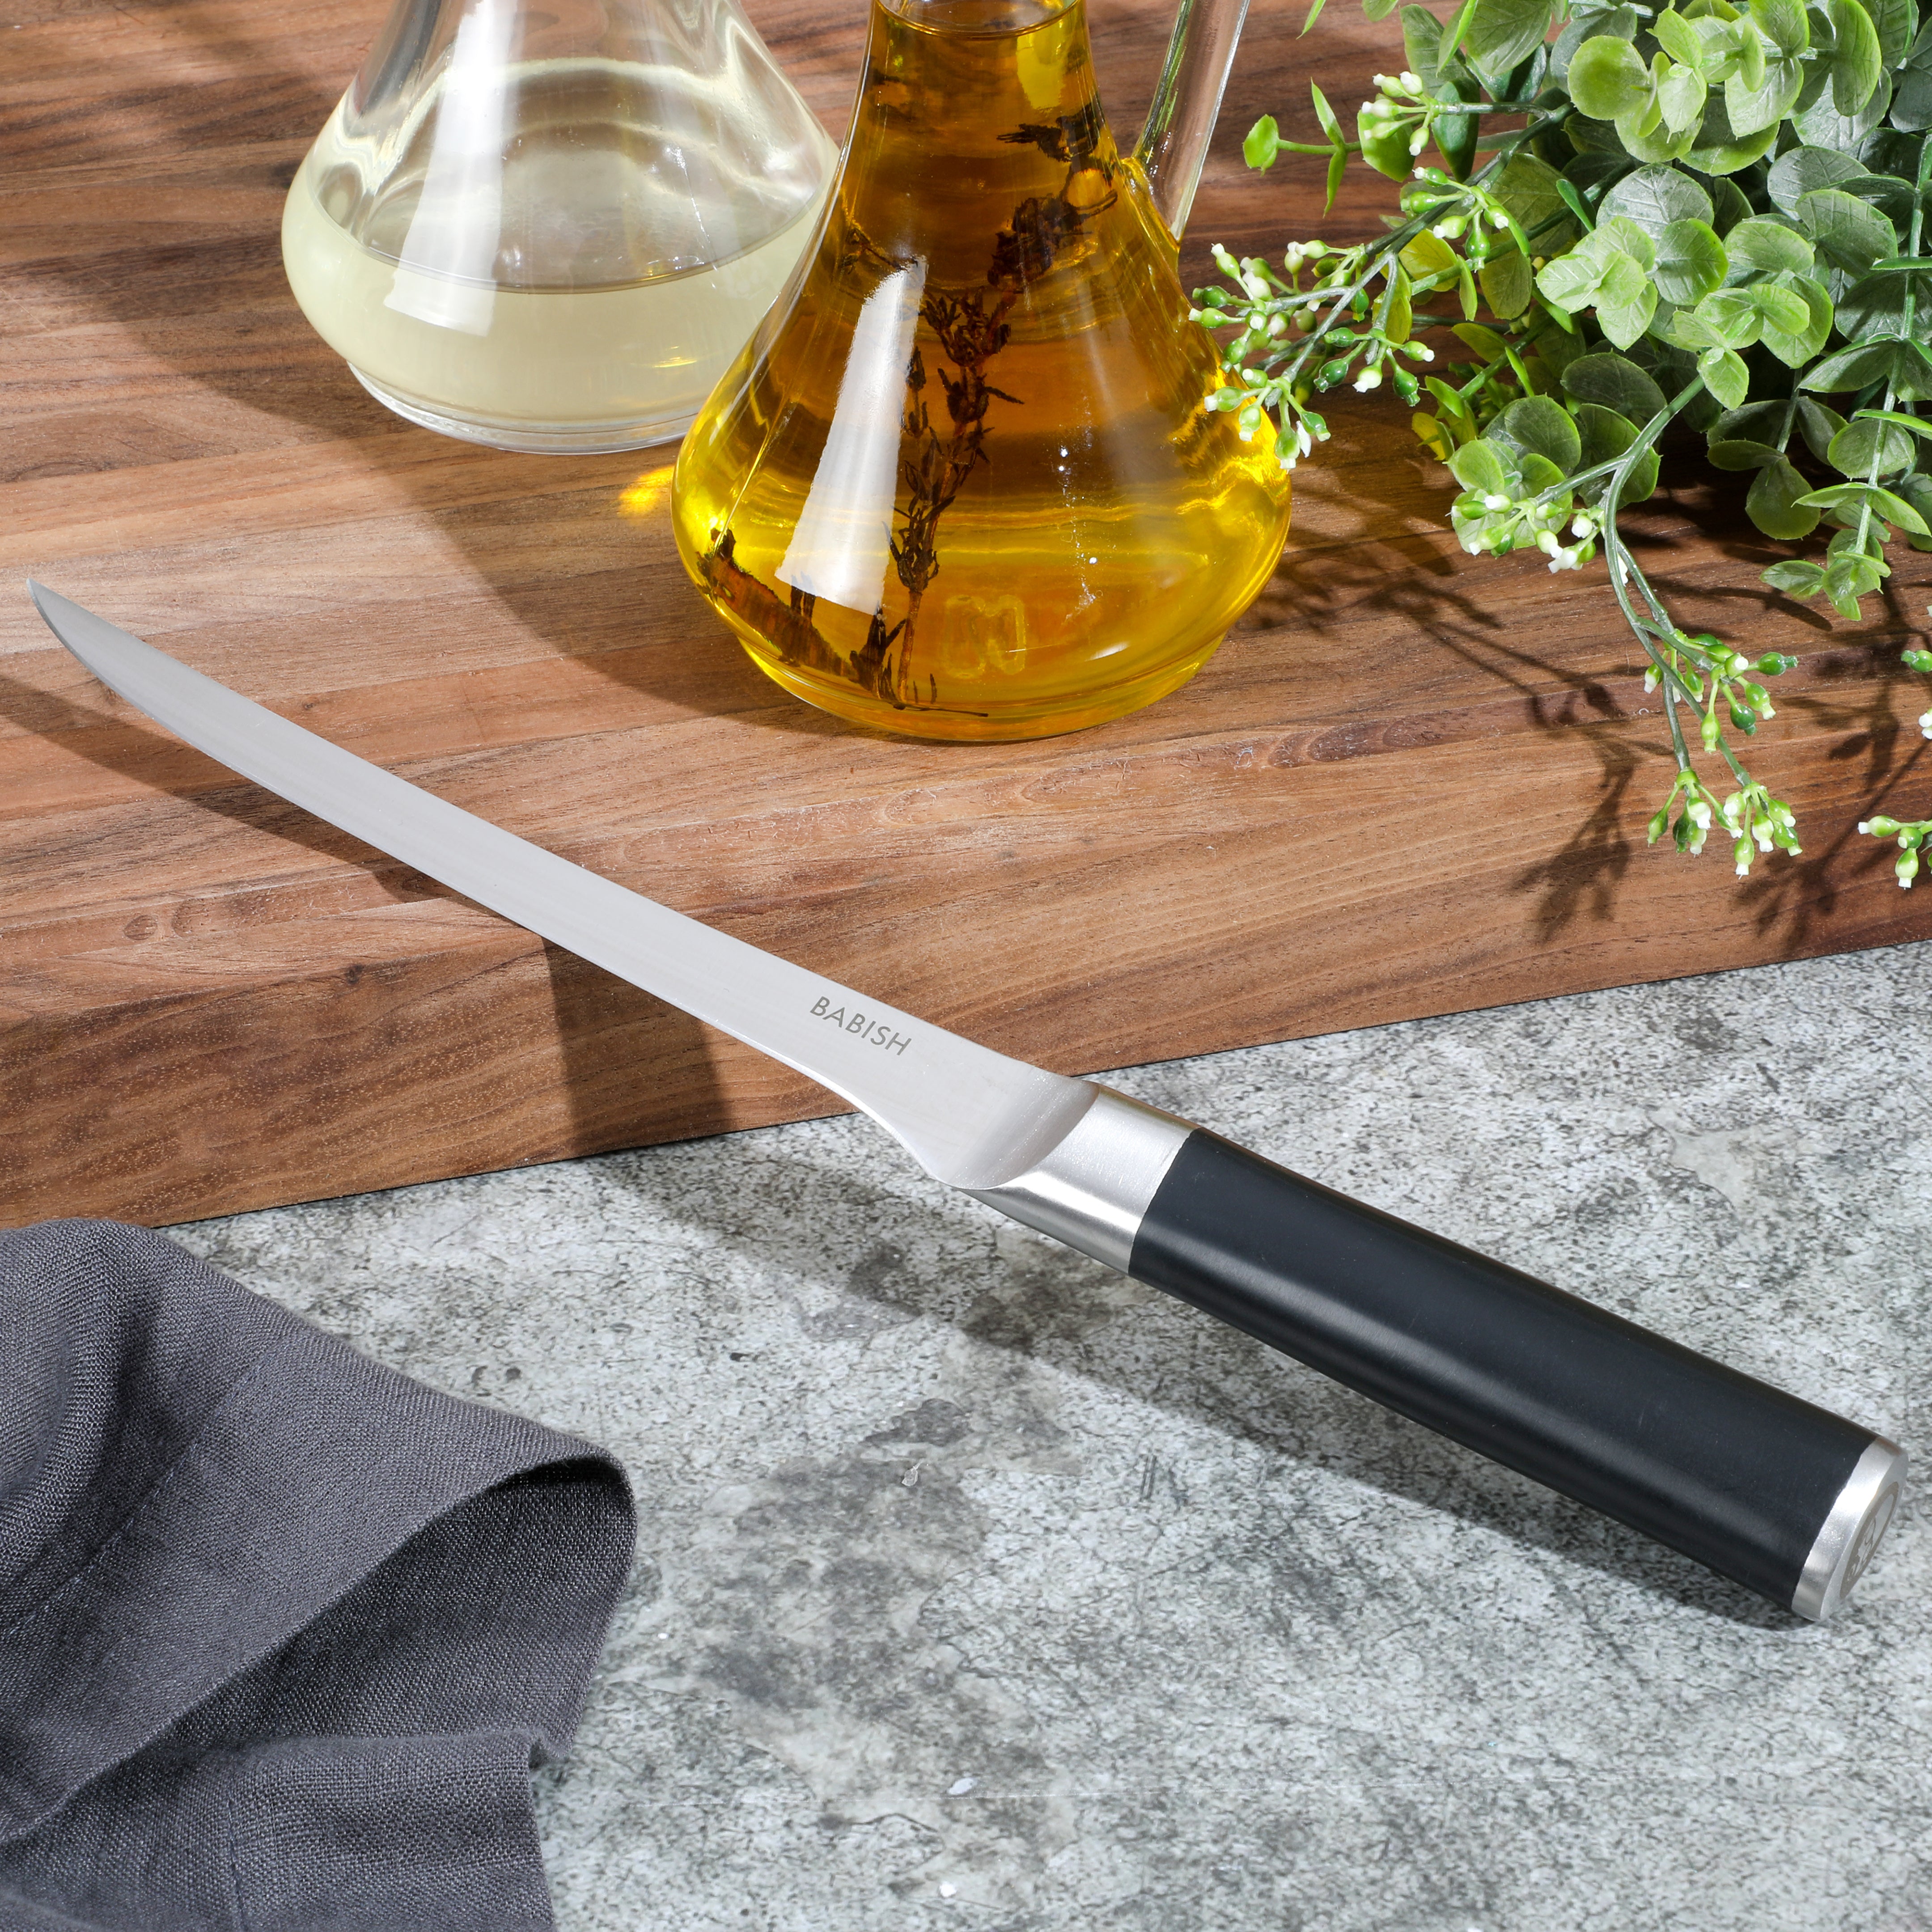 Babish Santoku Knife, Stainless Steel, ABS Handle, 6.5 Inches